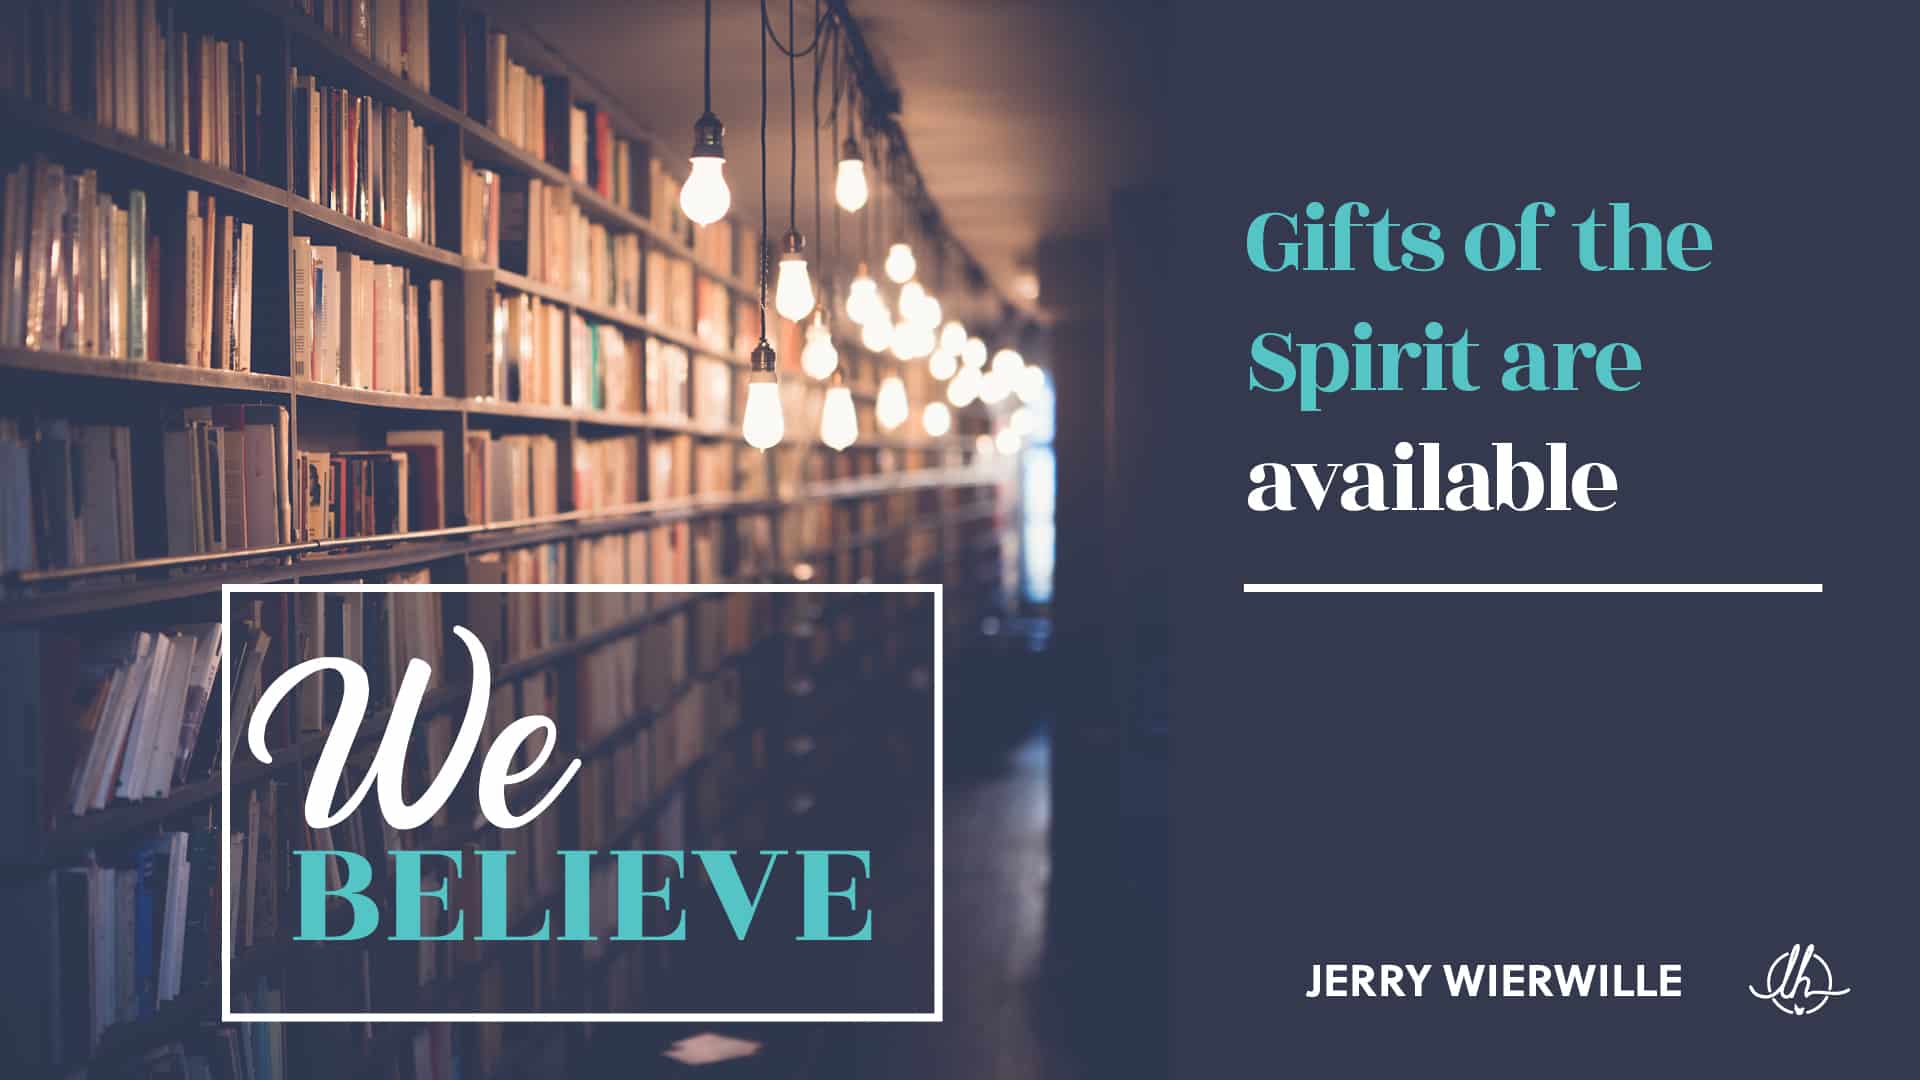 Gifts of the Spirit are Available